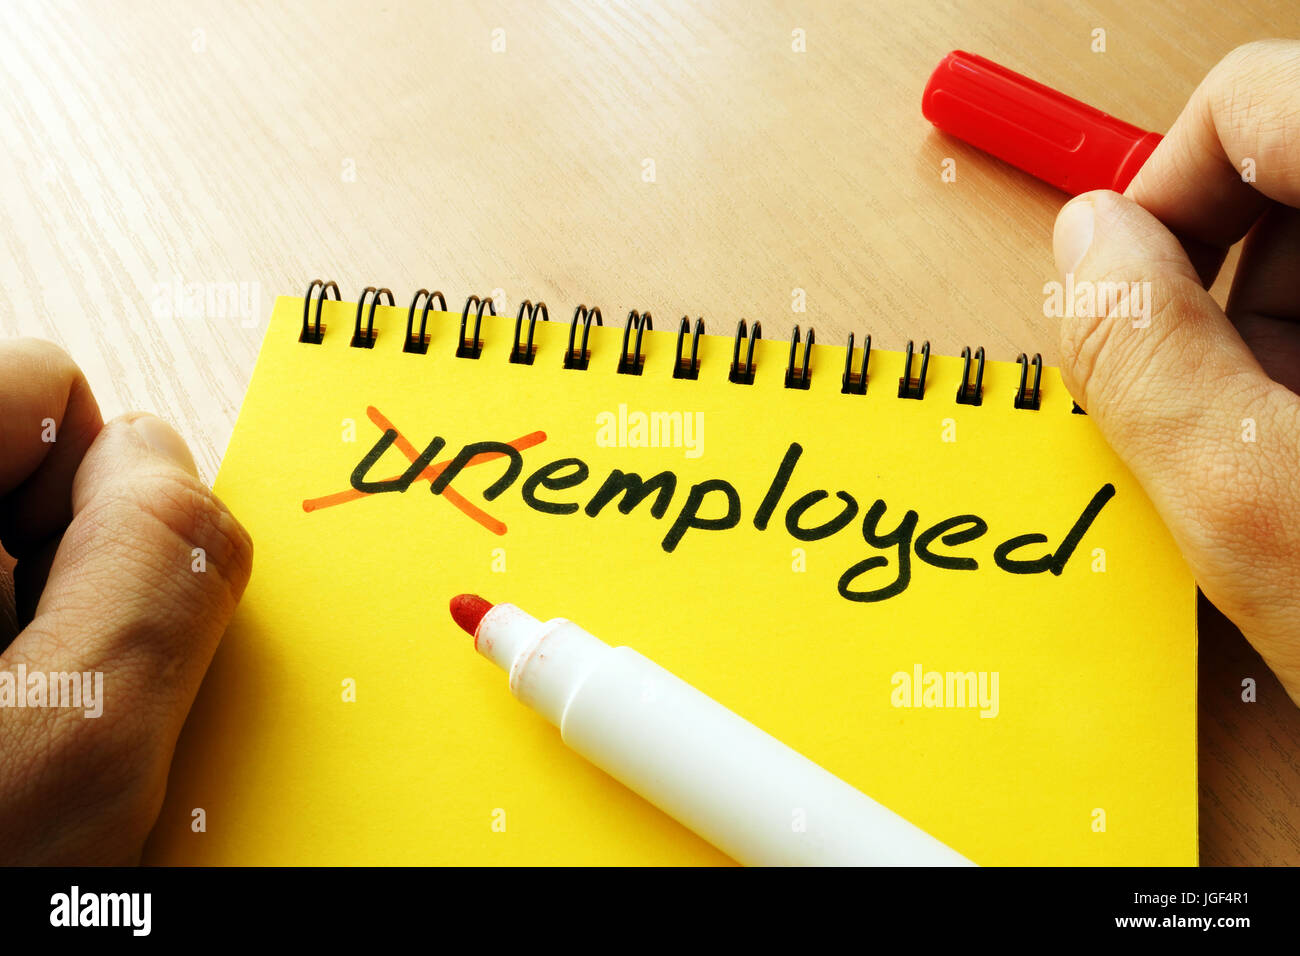 Unemployed with crossed un. Successful employment concept. Stock Photo